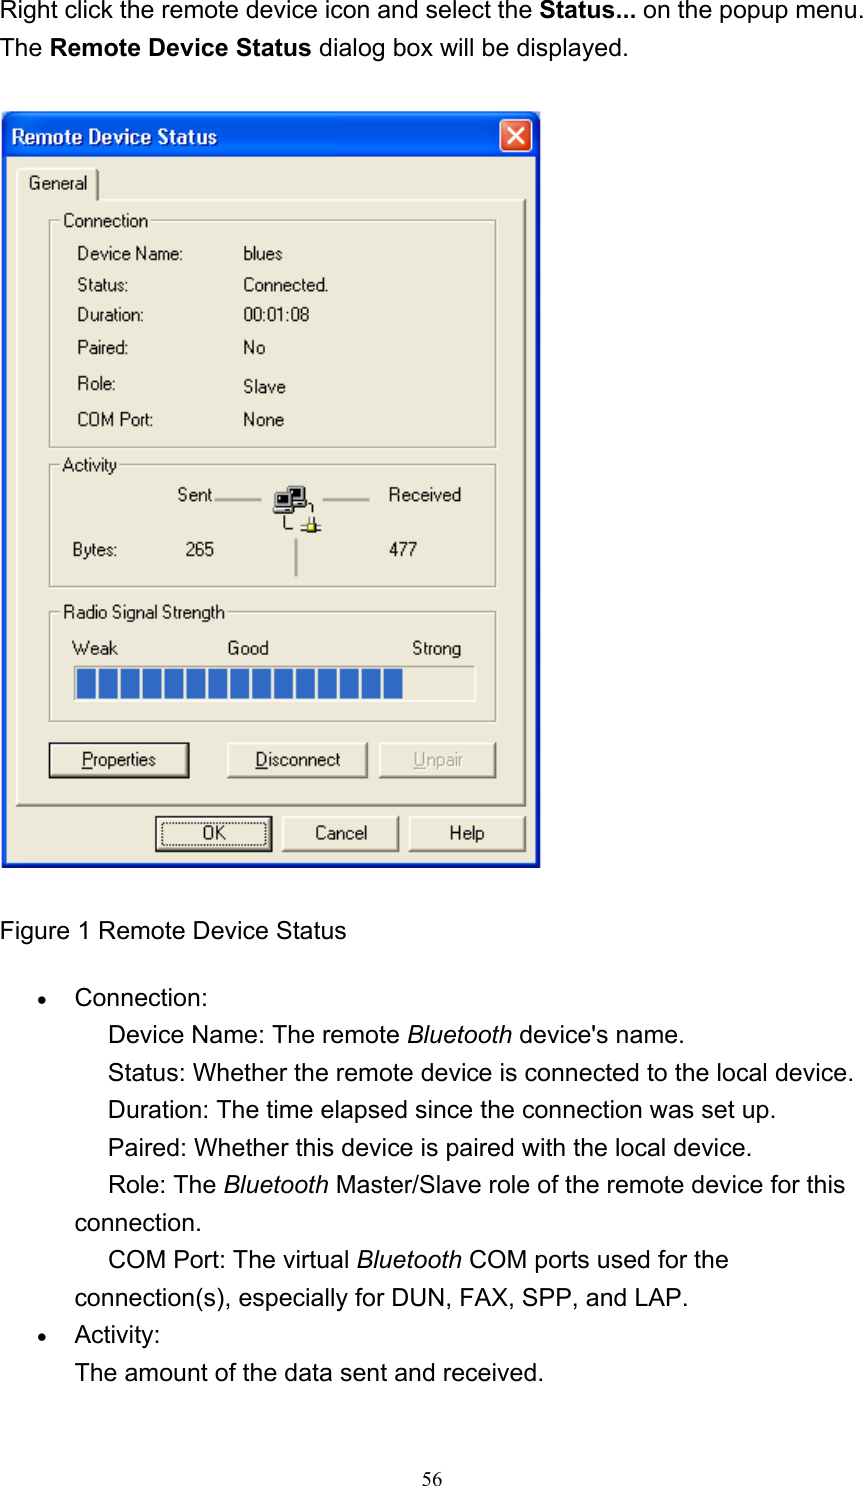   56Right click the remote device icon and select the Status... on the popup menu. The Remote Device Status dialog box will be displayed.  Figure 1 Remote Device Status • Connection:      Device Name: The remote Bluetooth device&apos;s name.      Status: Whether the remote device is connected to the local device.      Duration: The time elapsed since the connection was set up.      Paired: Whether this device is paired with the local device.      Role: The Bluetooth Master/Slave role of the remote device for this connection.      COM Port: The virtual Bluetooth COM ports used for the connection(s), especially for DUN, FAX, SPP, and LAP.   • Activity: The amount of the data sent and received.   